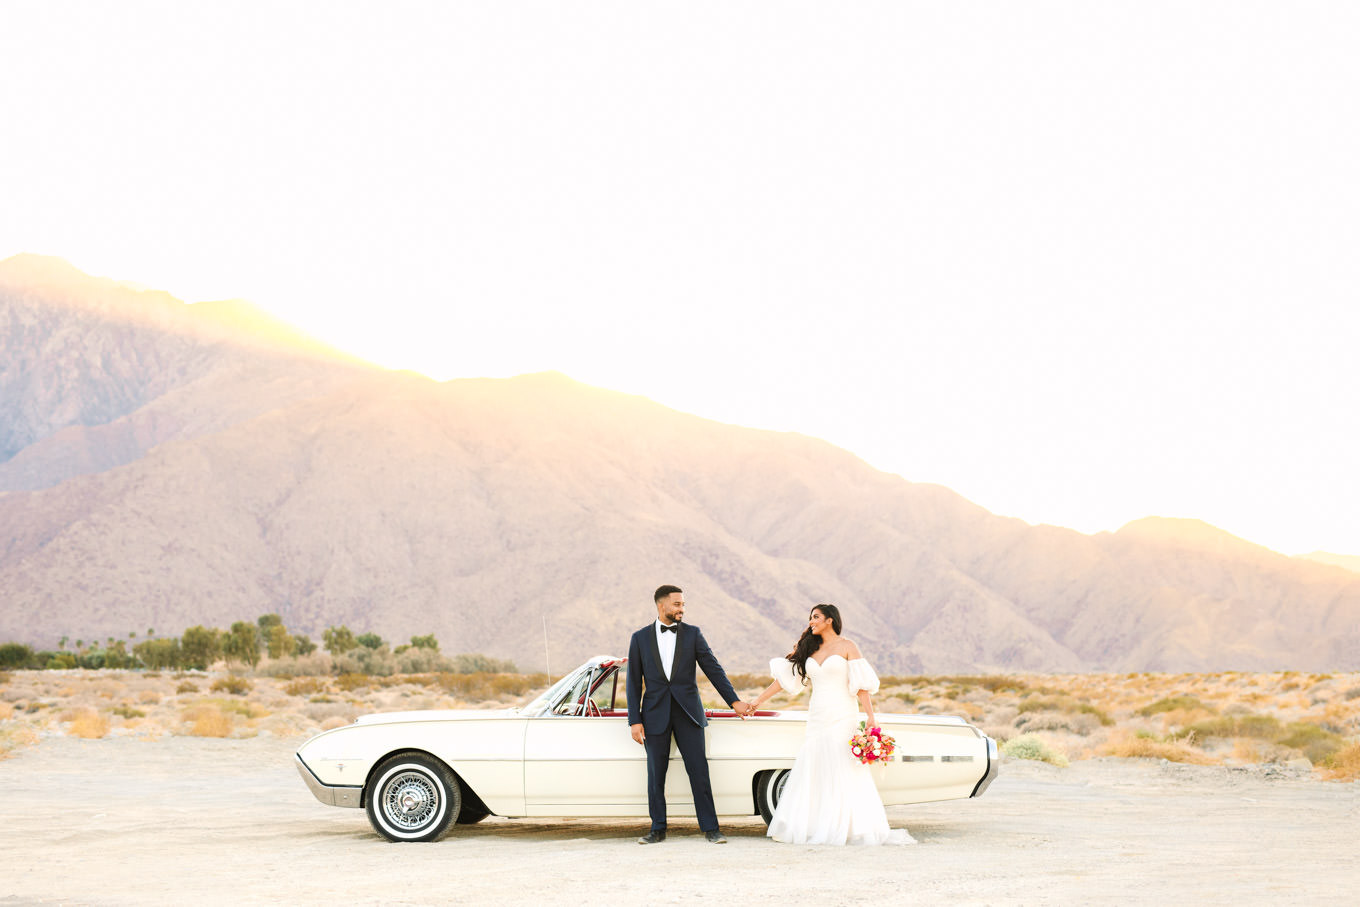 Palm Springs mountain elopement with classic car | Engagement, elopement, and wedding photography roundup of Mary Costa’s favorite images from 2020 | Colorful and elevated photography for fun-loving couples in Southern California | #2020wedding #elopement #weddingphoto #weddingphotography #microwedding   Source: Mary Costa Photography | Los Angeles